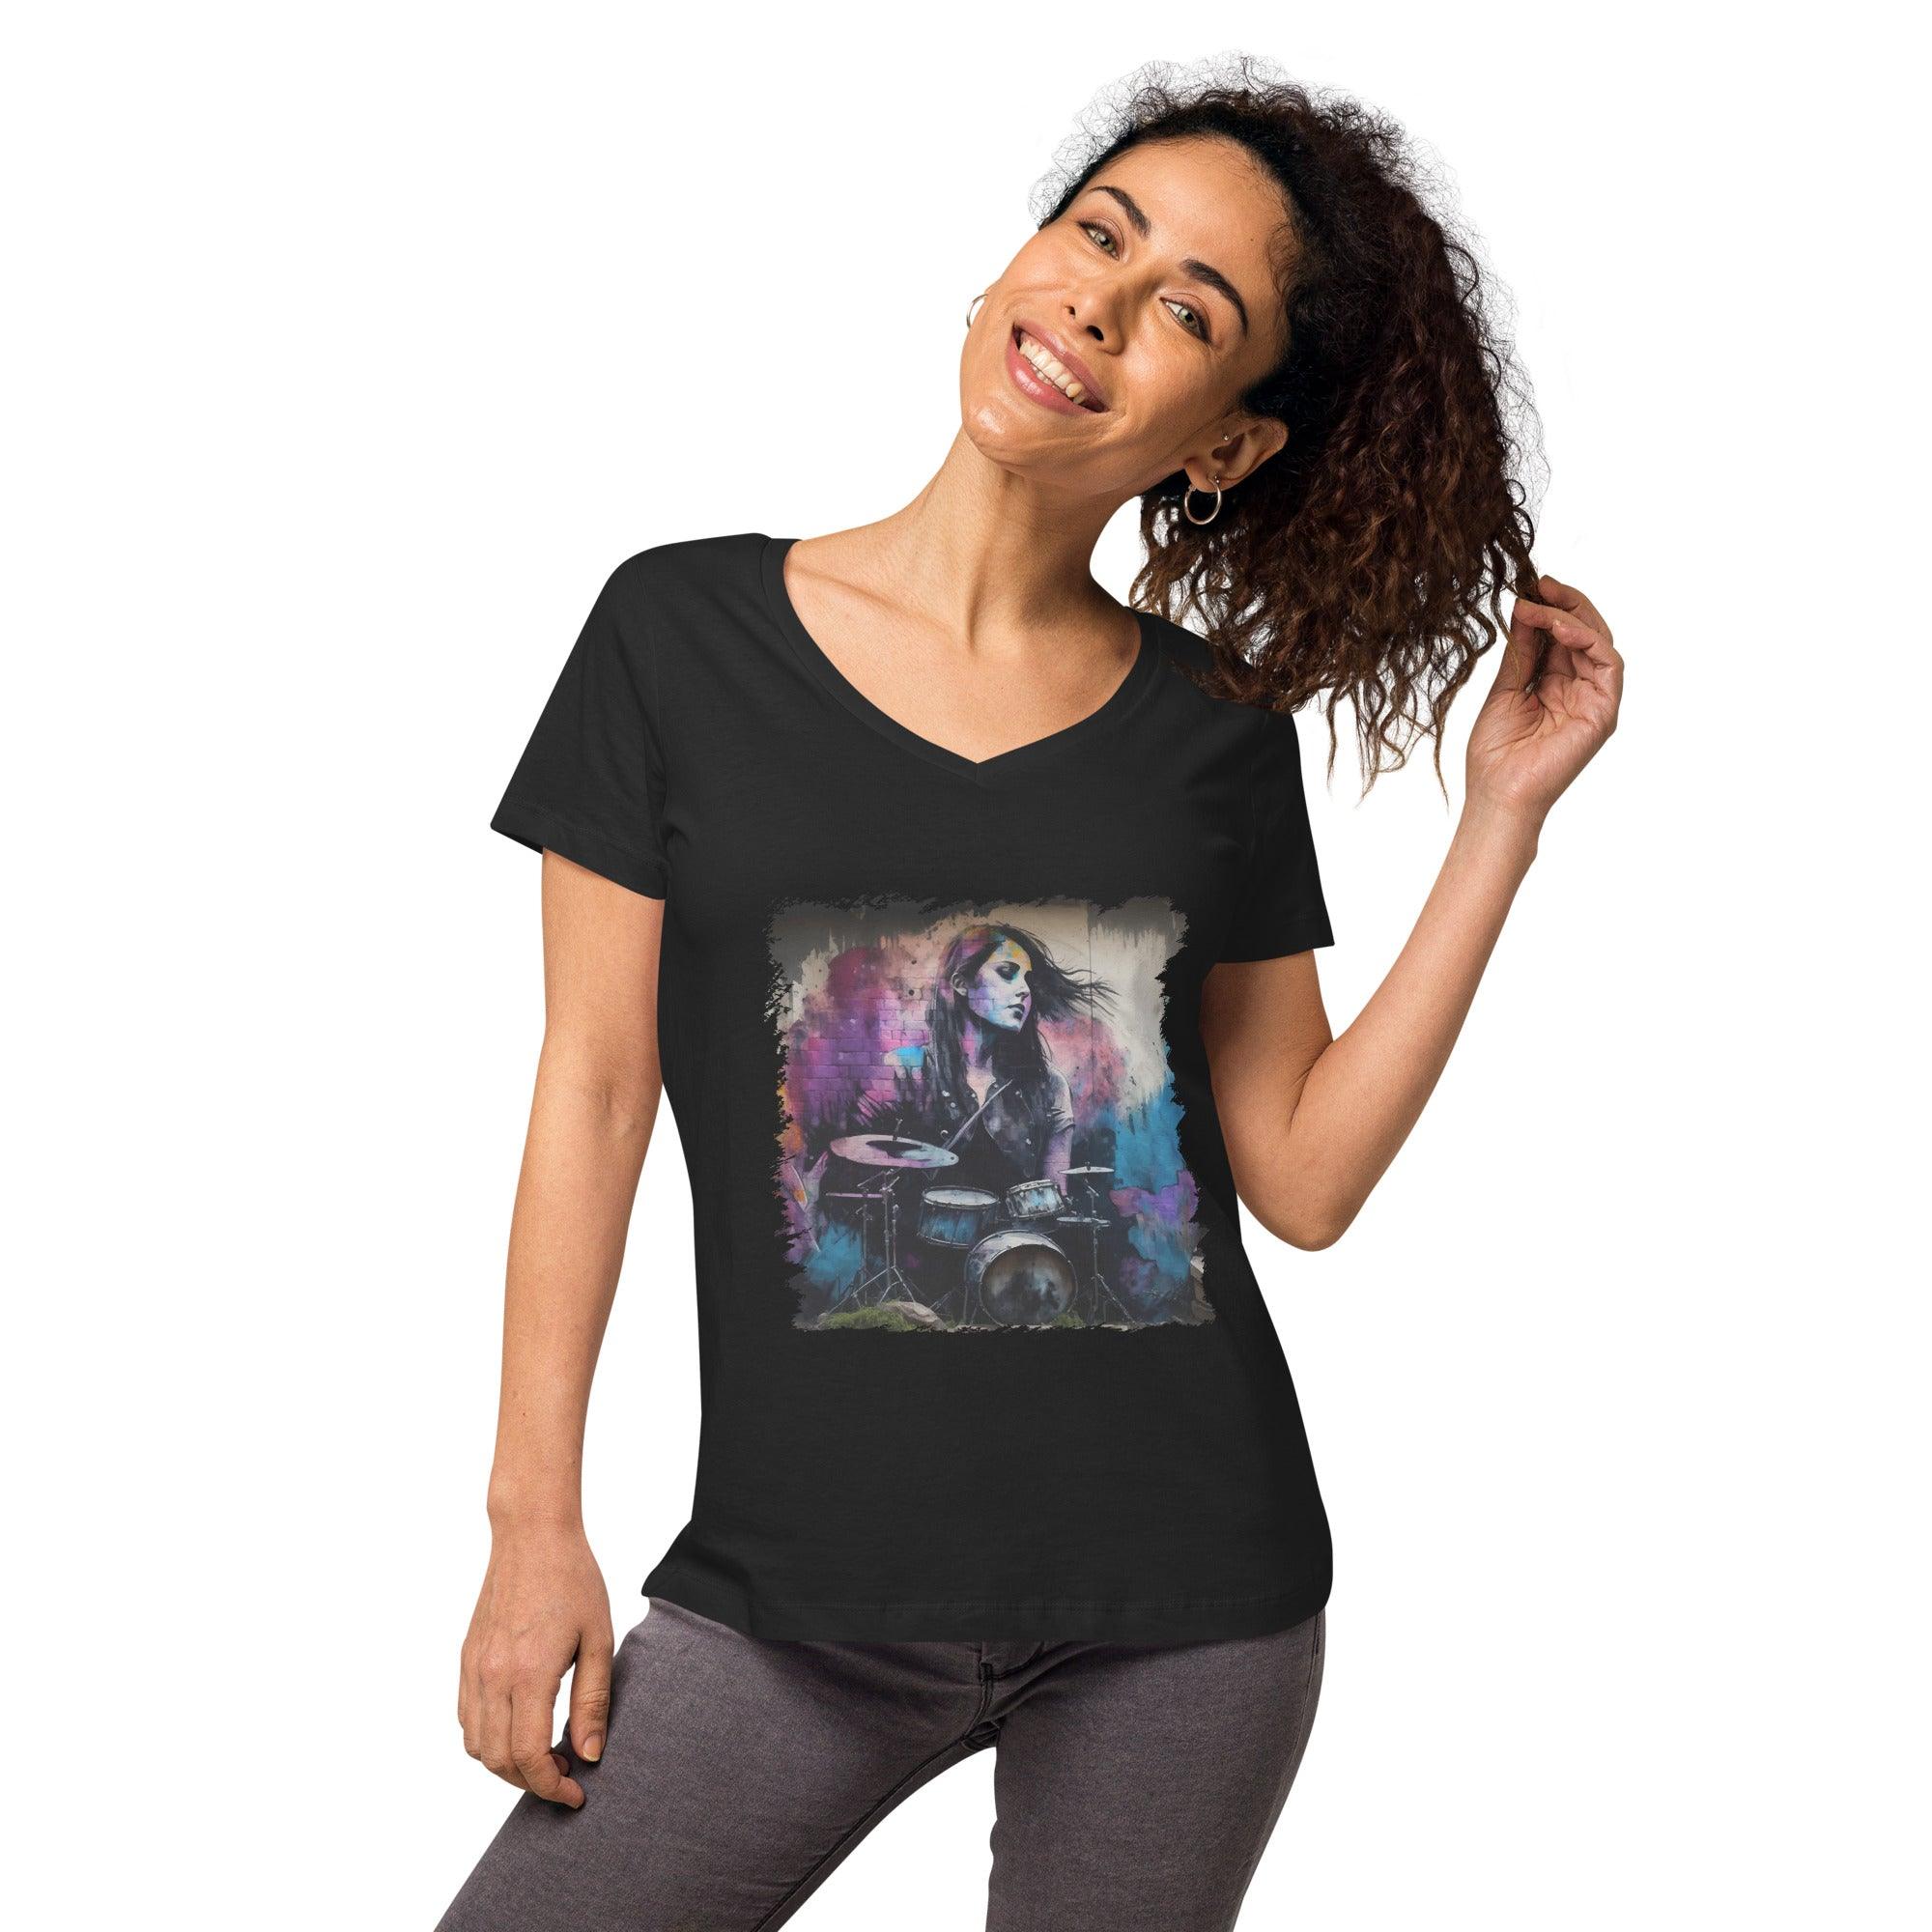 She Drums With Power Women’s Fitted V-neck T-shirt - Beyond T-shirts